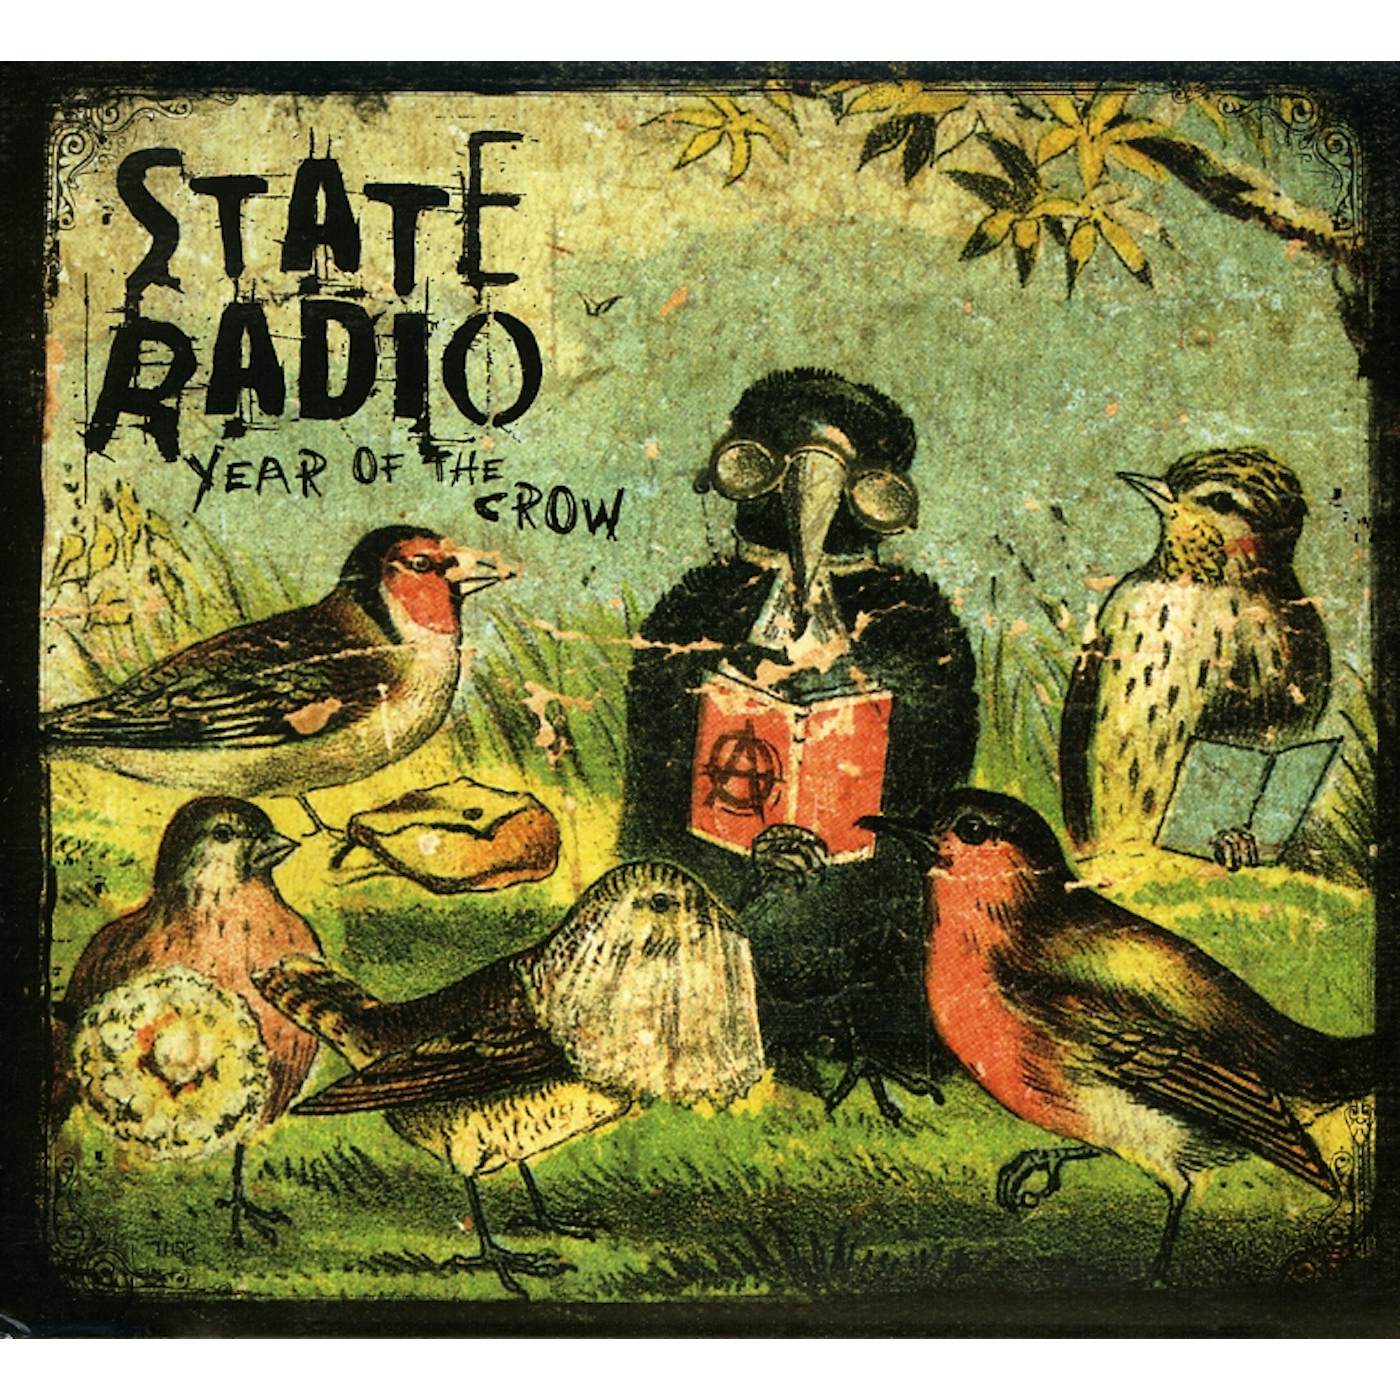 State Radio YEAR OF THE CROW CD